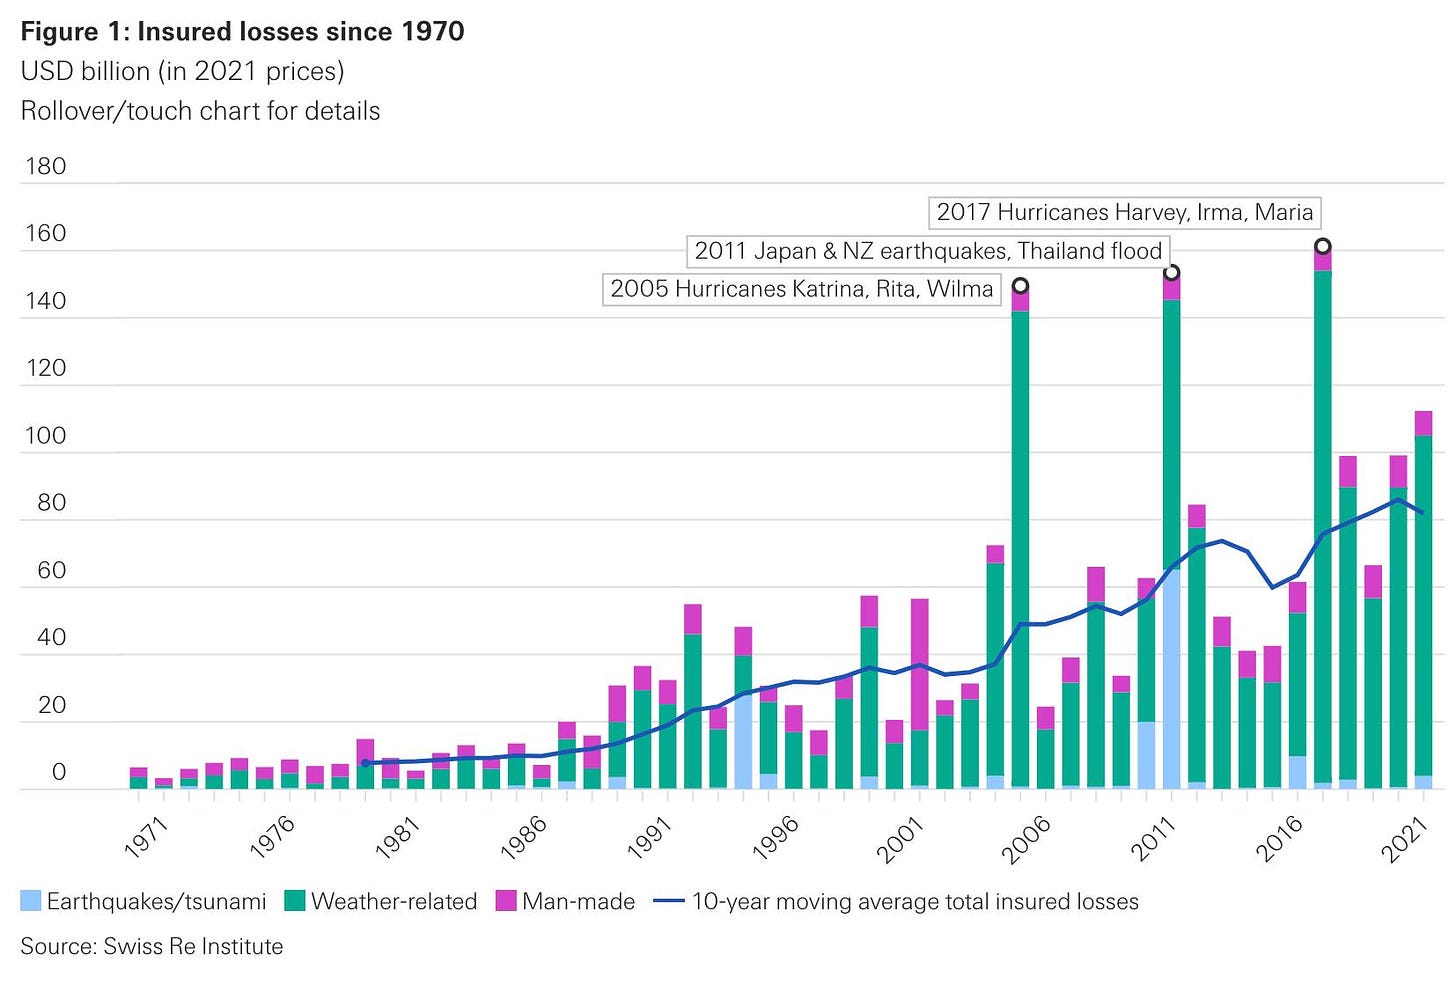 Może być zdjęciem przedstawiającym tekst „Figure 1: Insured losses since 1970 USD billion (in 2021 prices) Rollover/touch chart for details 180 160 140 120 2017 Hurricanes Harvey, Irma, Maria 2011 Japan NZ earthquakes, Thailand flood 2005 Hurrican Katrina, Rita, Wilma 100 80 60 40 20 0 1971 1976 1981 1986 Earthquakes/tsunami Source: Swiss Re Institute 1991 Weather-related 1996 Man-made 2001 2006 2011 10-year moving average total insured losses 2016 2021”